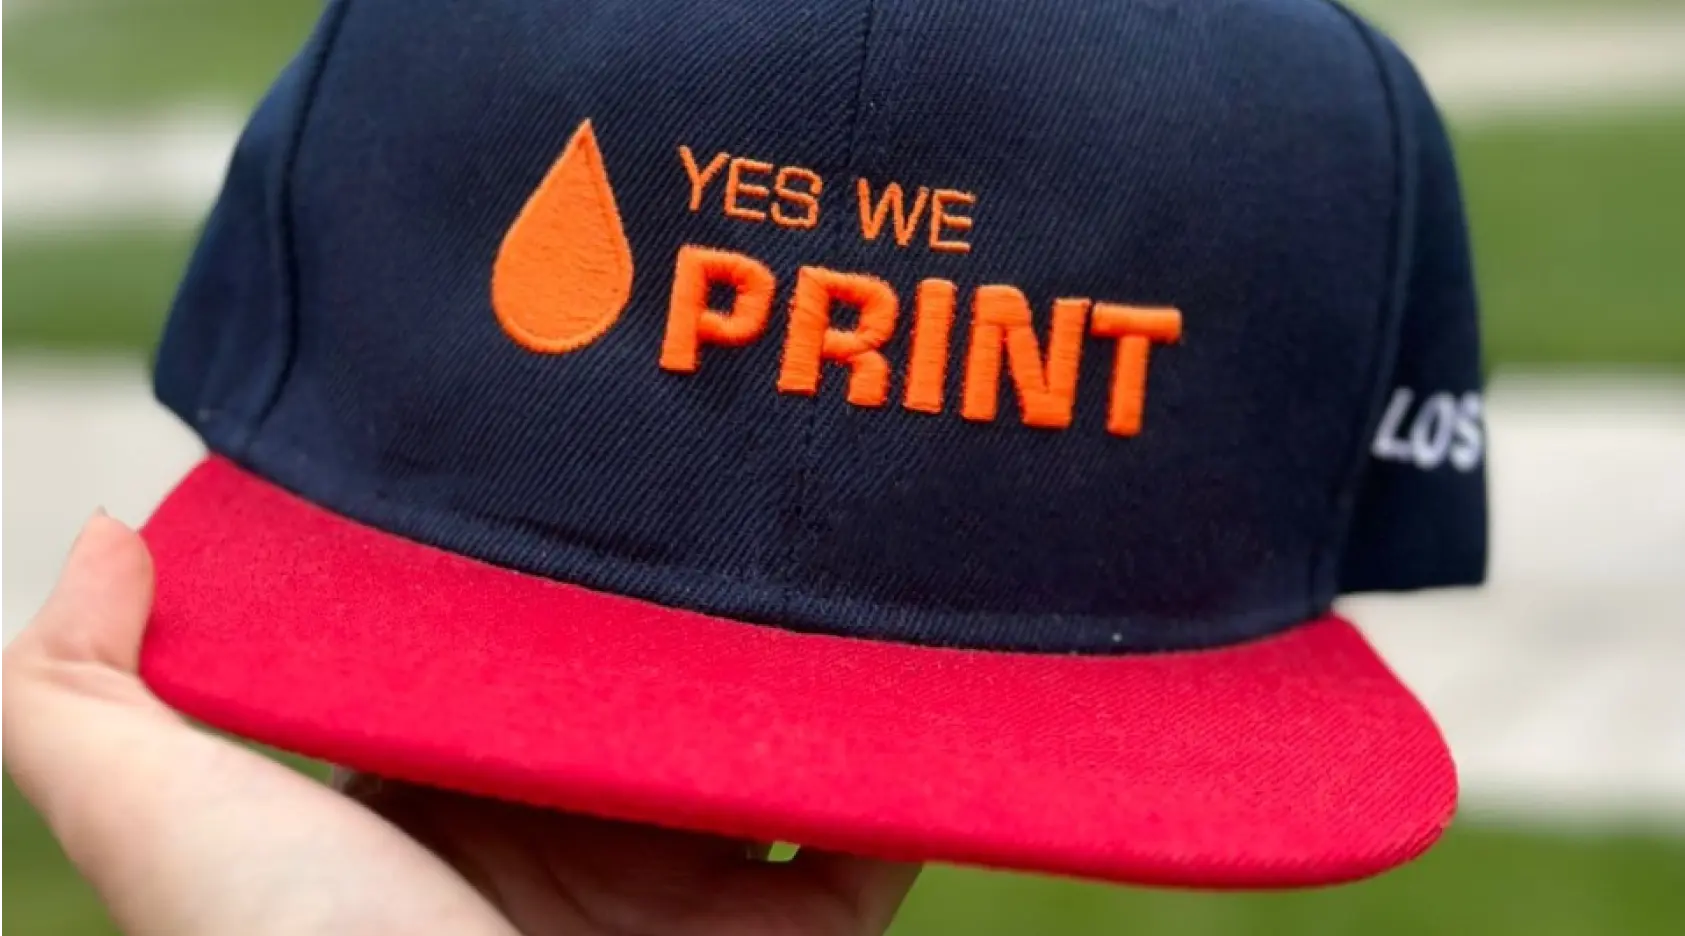 A hat with yes we print logo on it.